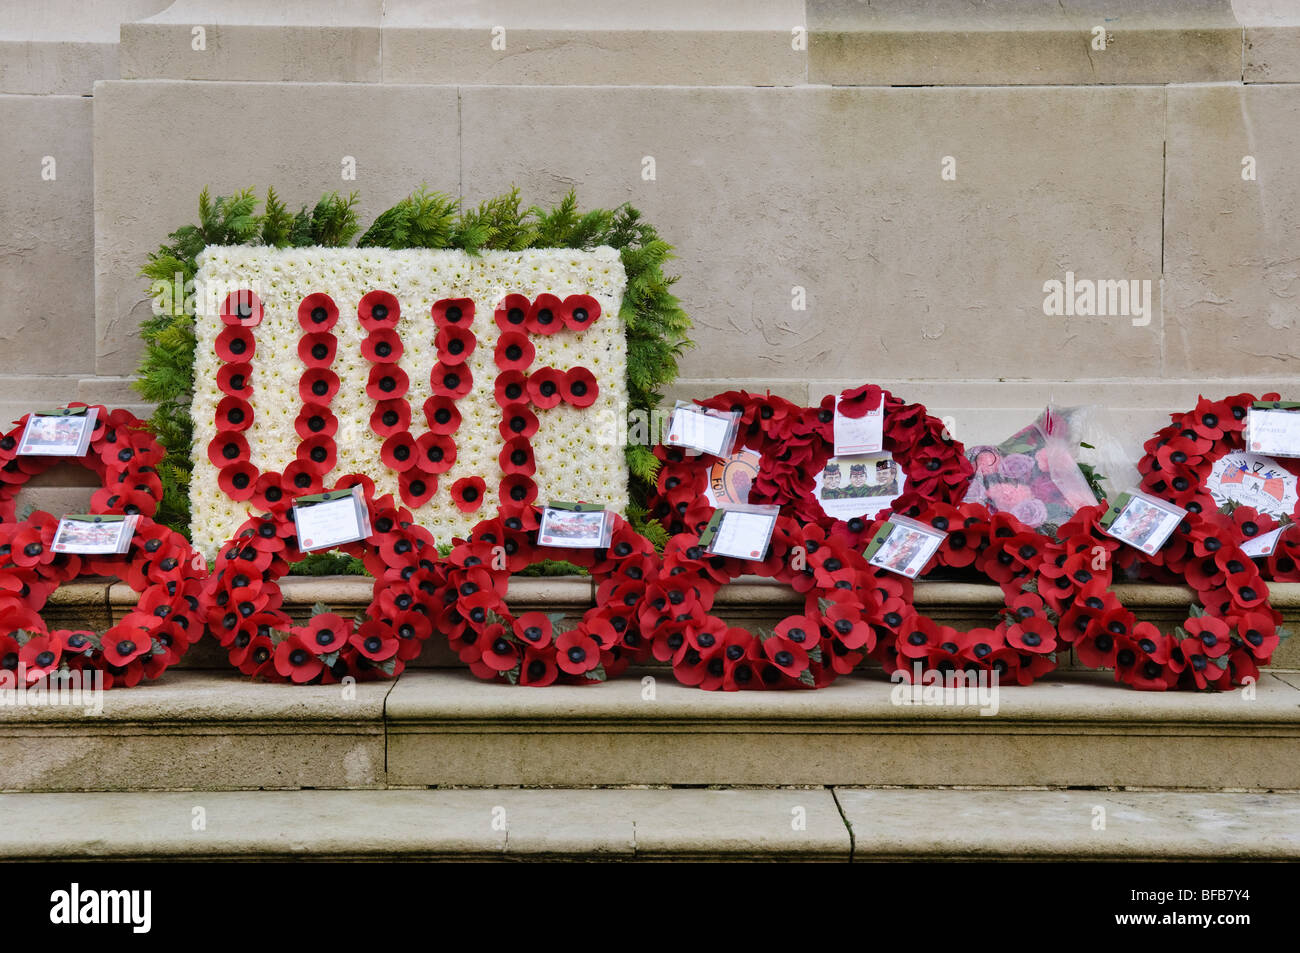 Poppy weaths on the steps of the cenotaph, along with a large Ulster Volunteer Force/UVF wreath Stock Photo